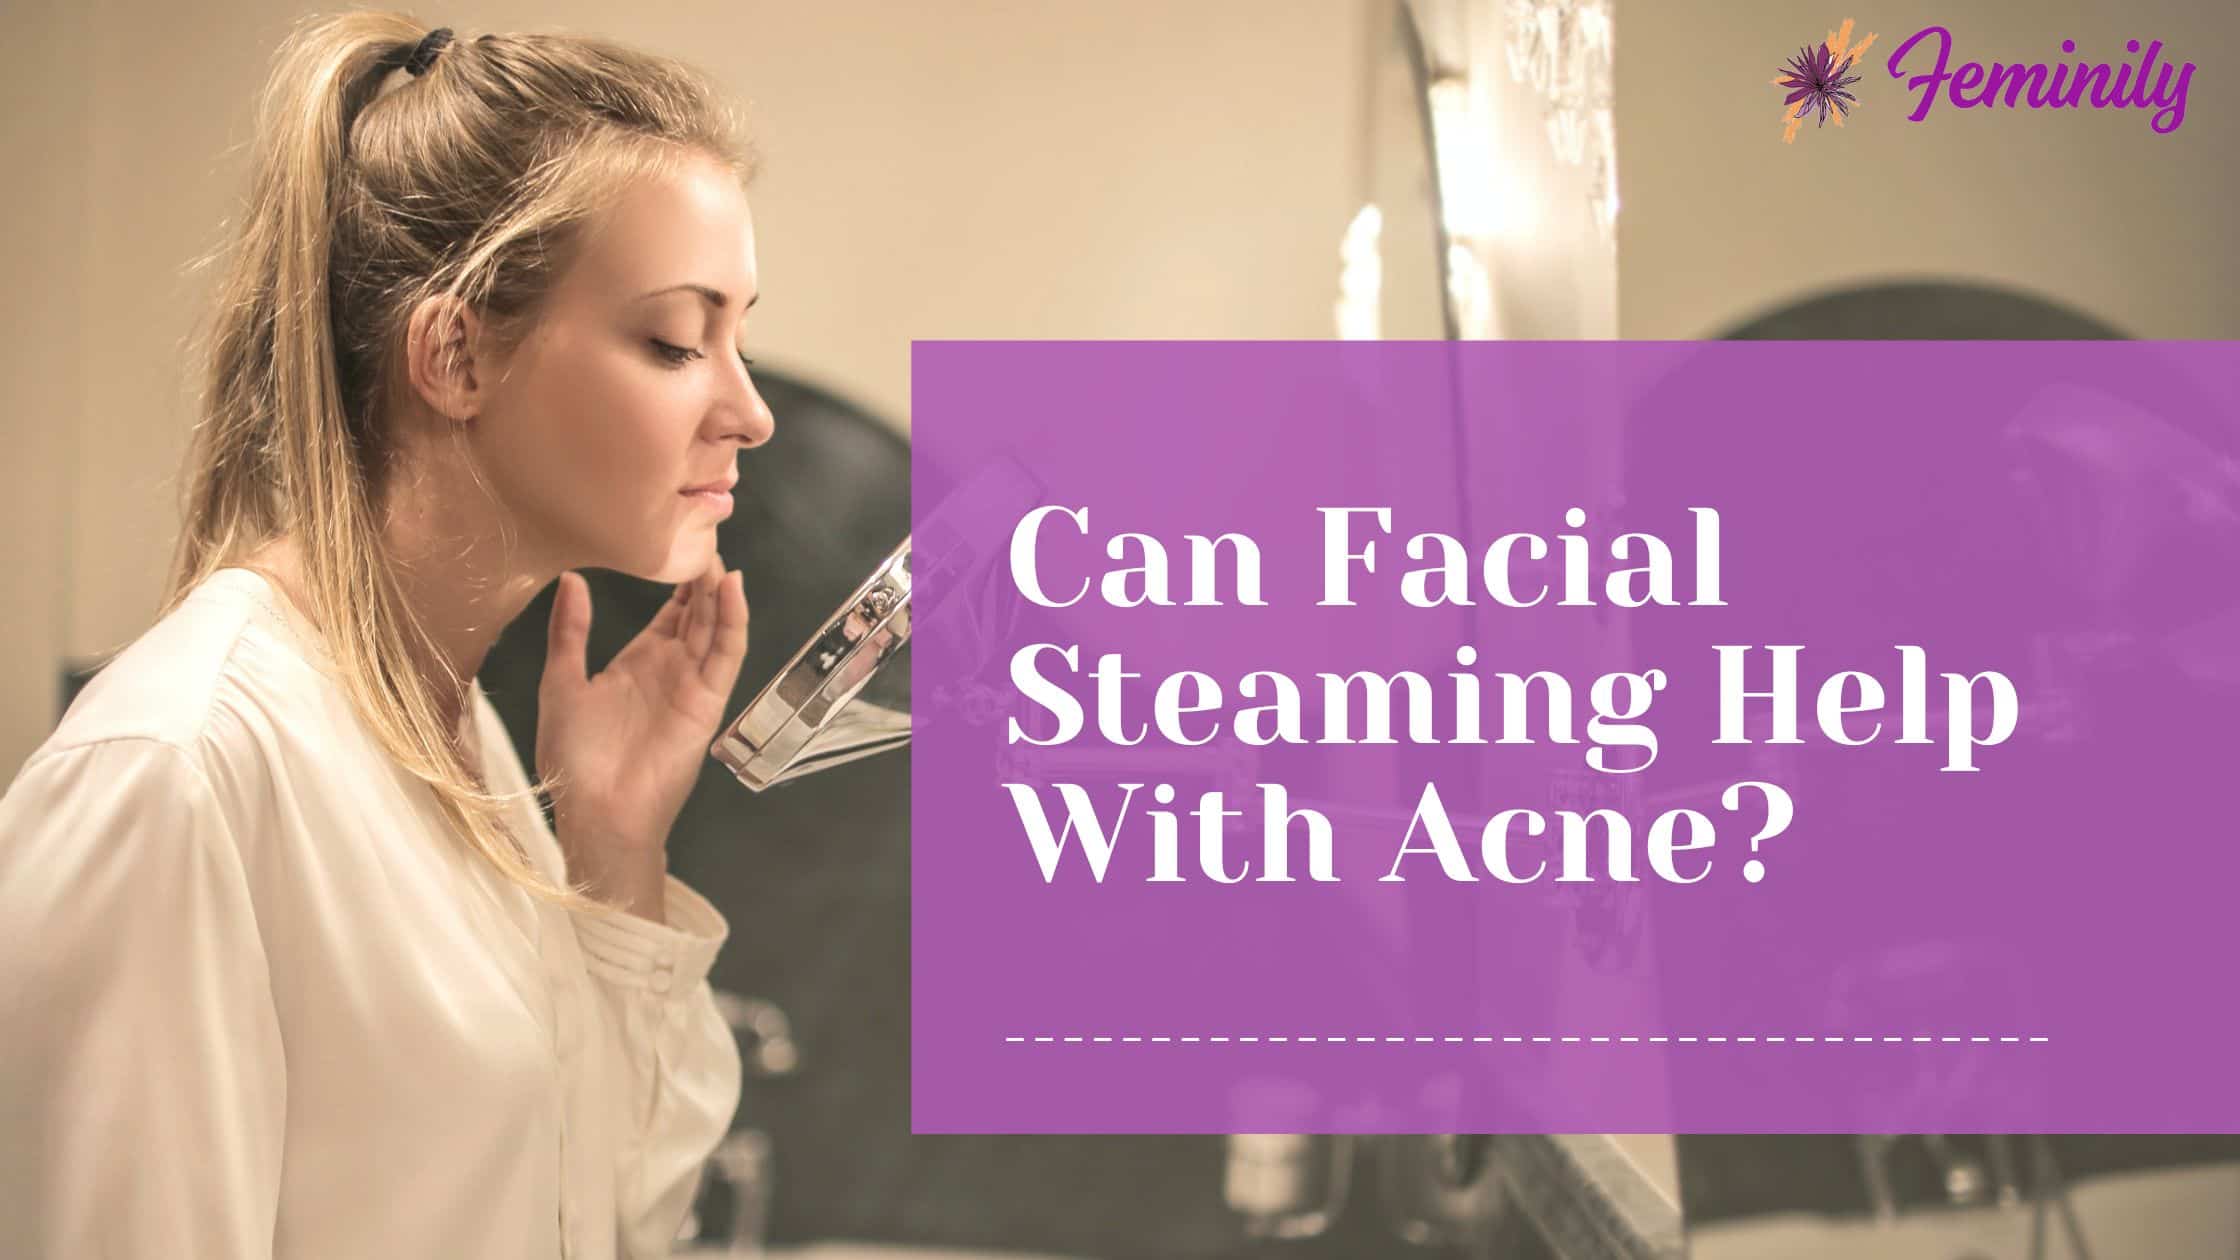 Can facial steaming help with acne